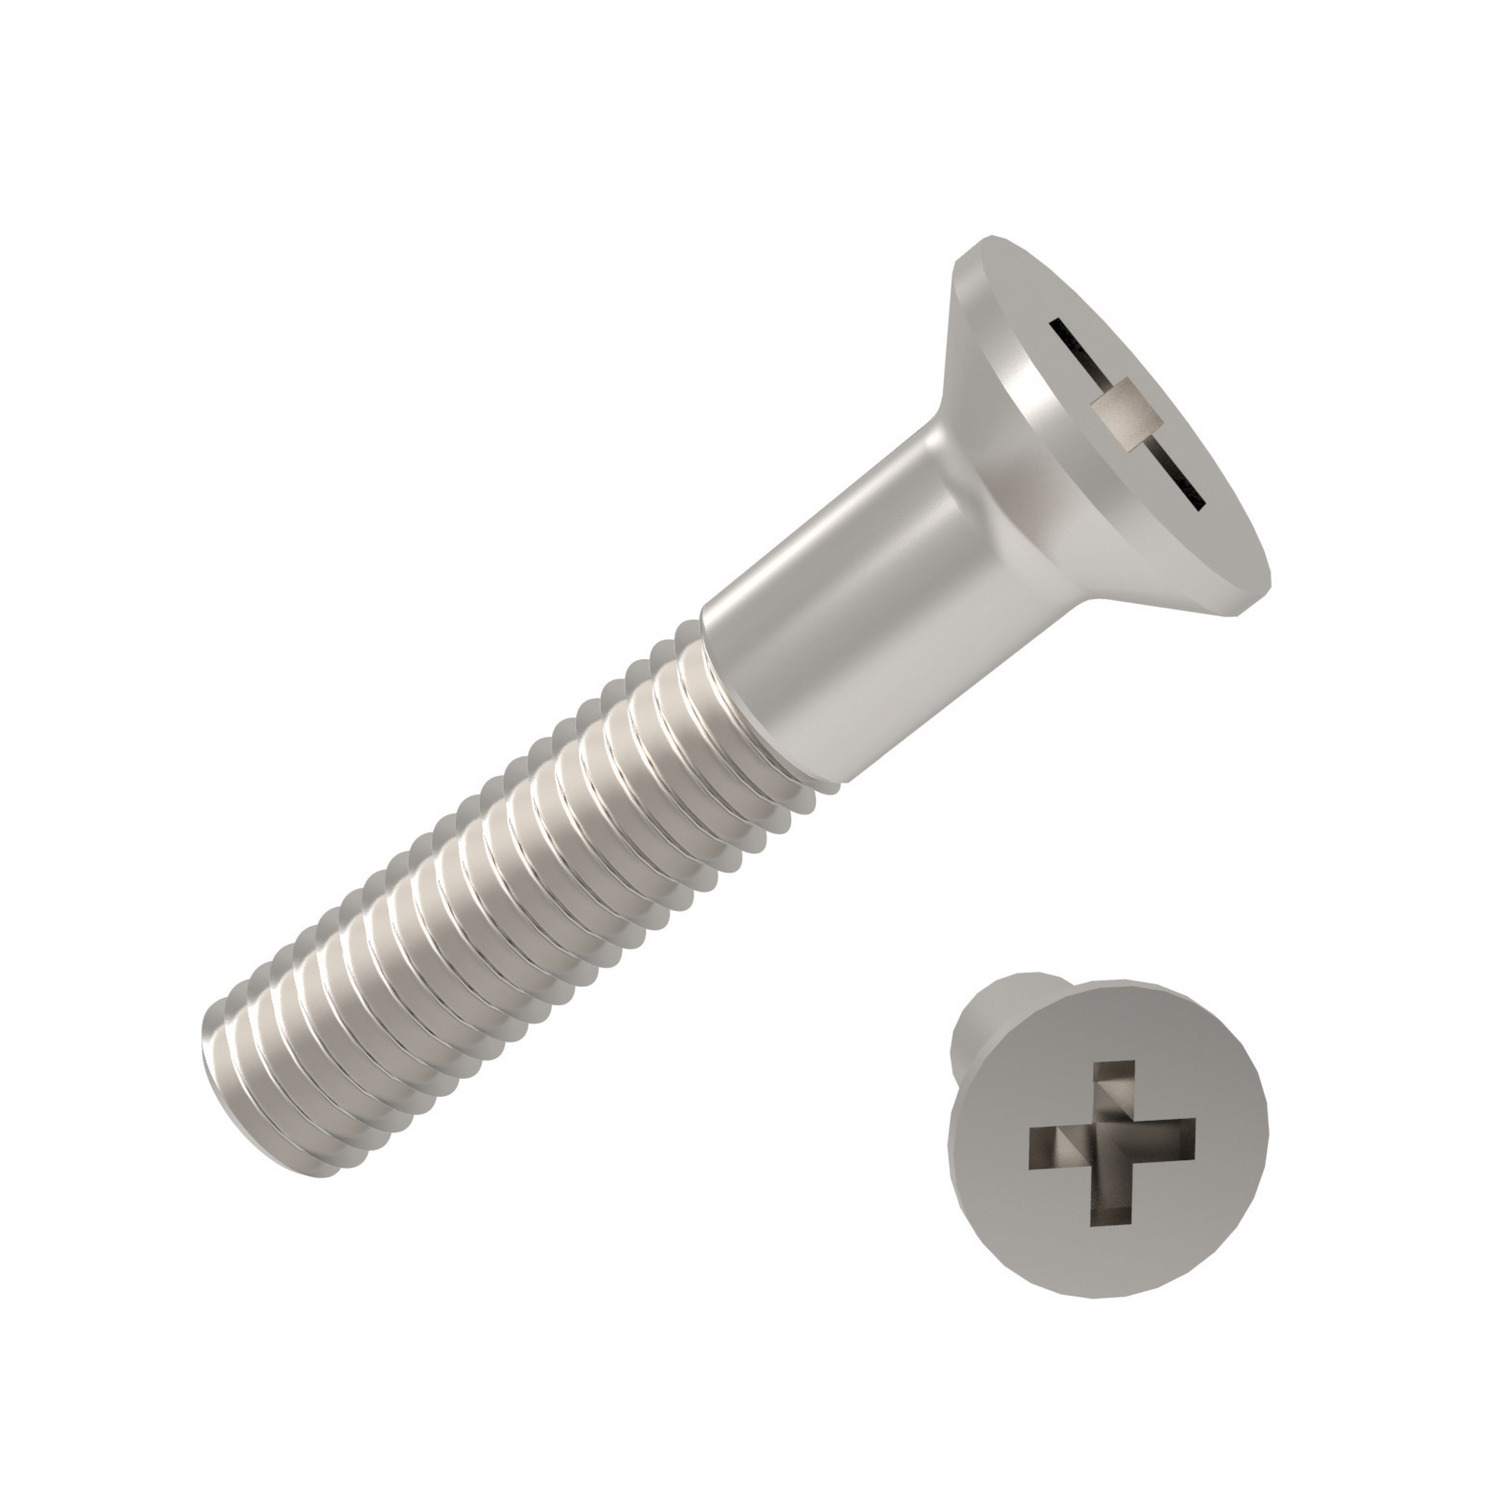 Product P0220.A2, Phillips Countersunk Machine Screws Phillips - A2 stainless / 